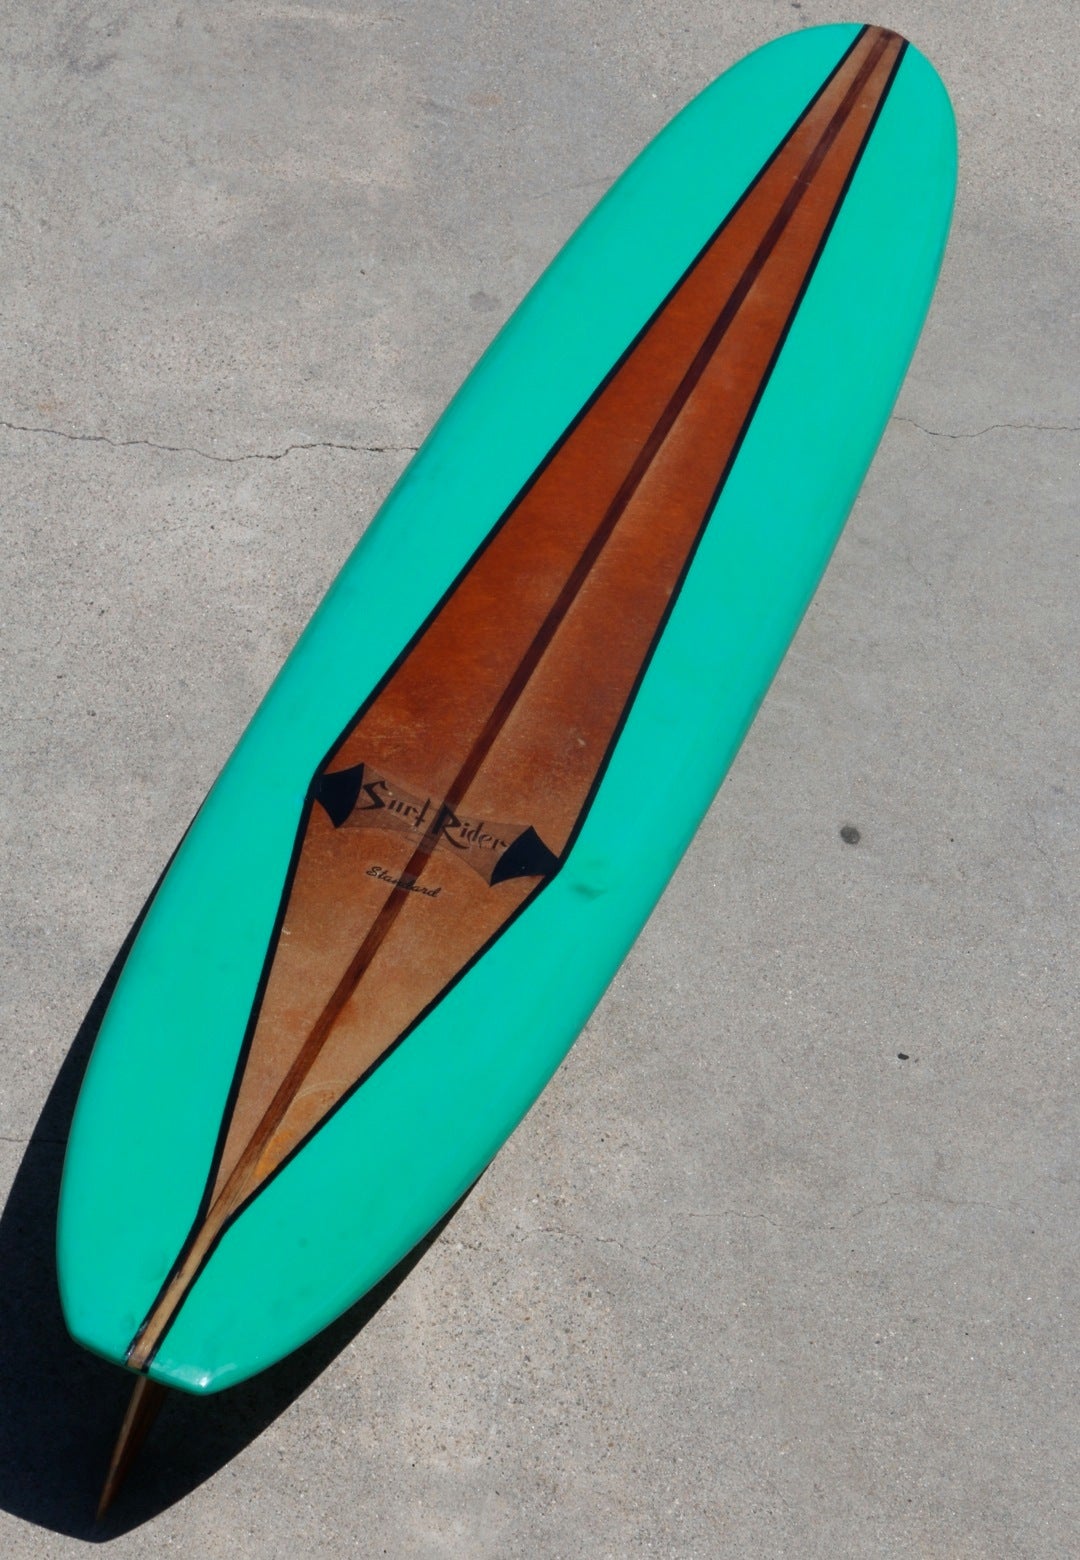 This early 1960s Surf Rider surfboard has been restored to its original luster without losing the authenticity or sensibility of its age. Teal green deck and vibrant acid splash bottom are accented by the all original natural center strip, logo,